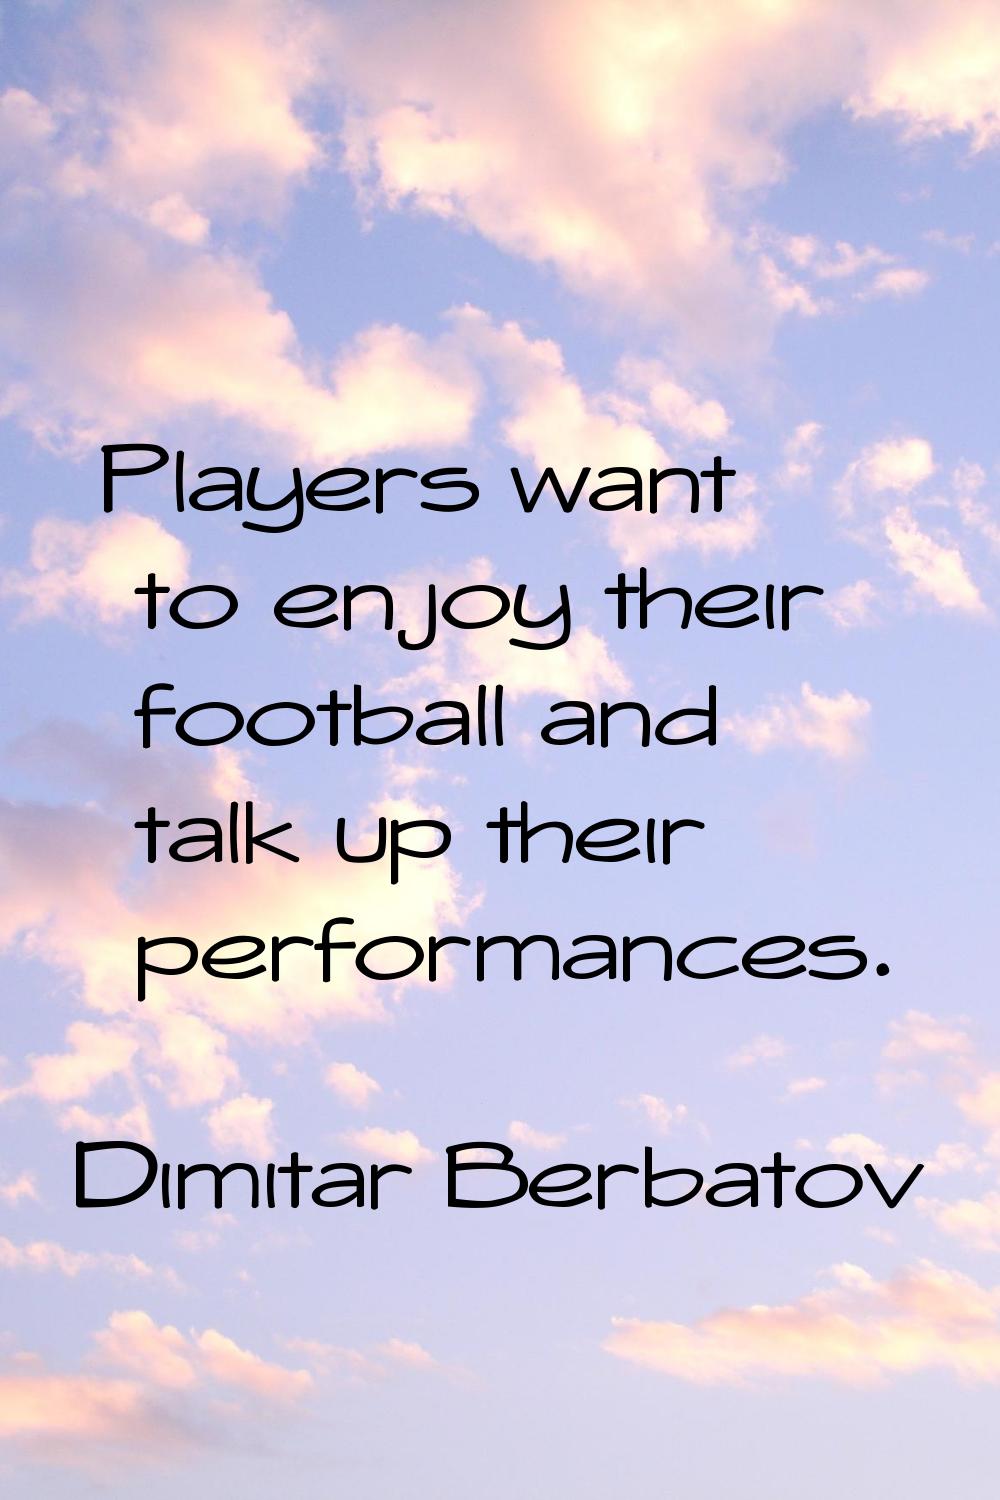 Players want to enjoy their football and talk up their performances.